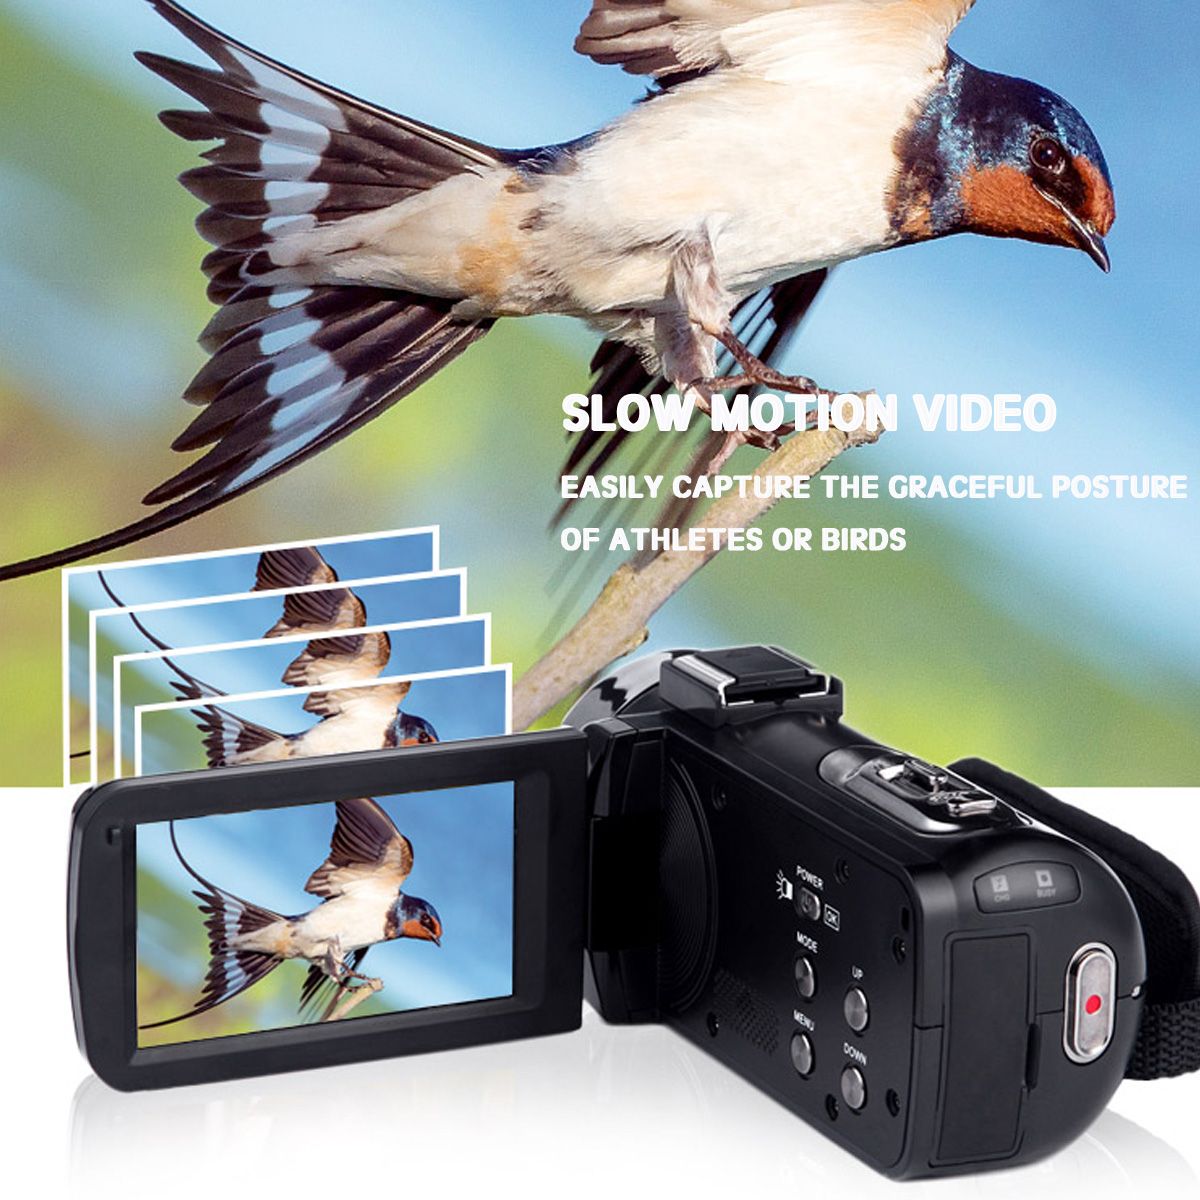 4K-WiFi-Ultra-HD-1080P-16X-ZOOM-Digital-Video-Camera-DV-Camcorder-with-Lens-and-Microphone-1426366